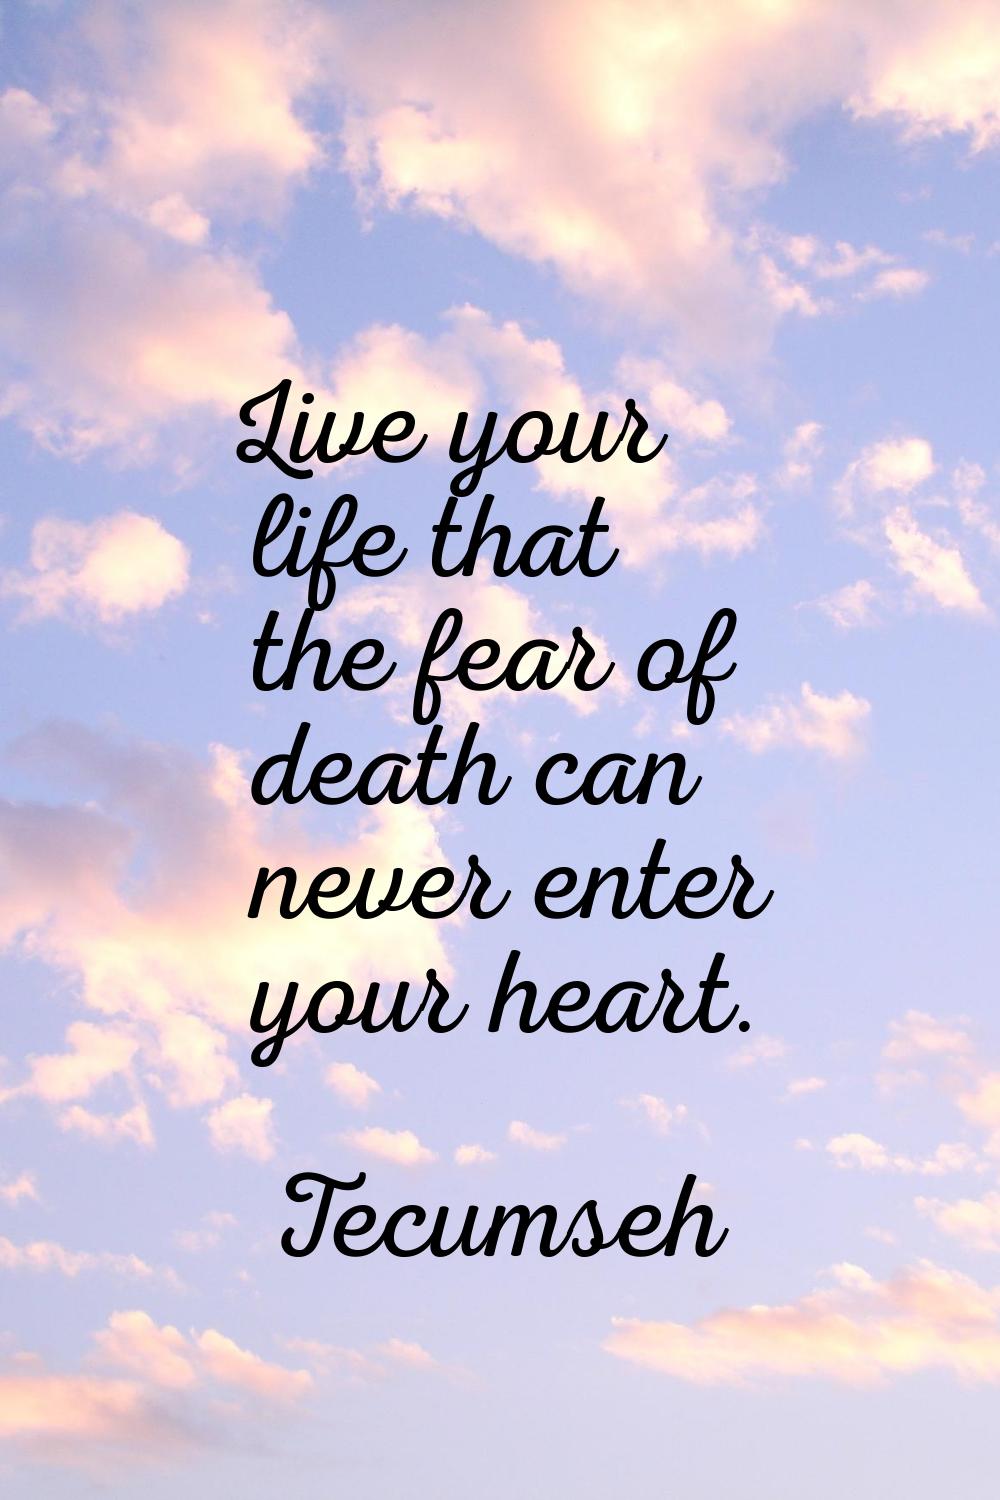 Live your life that the fear of death can never enter your heart.